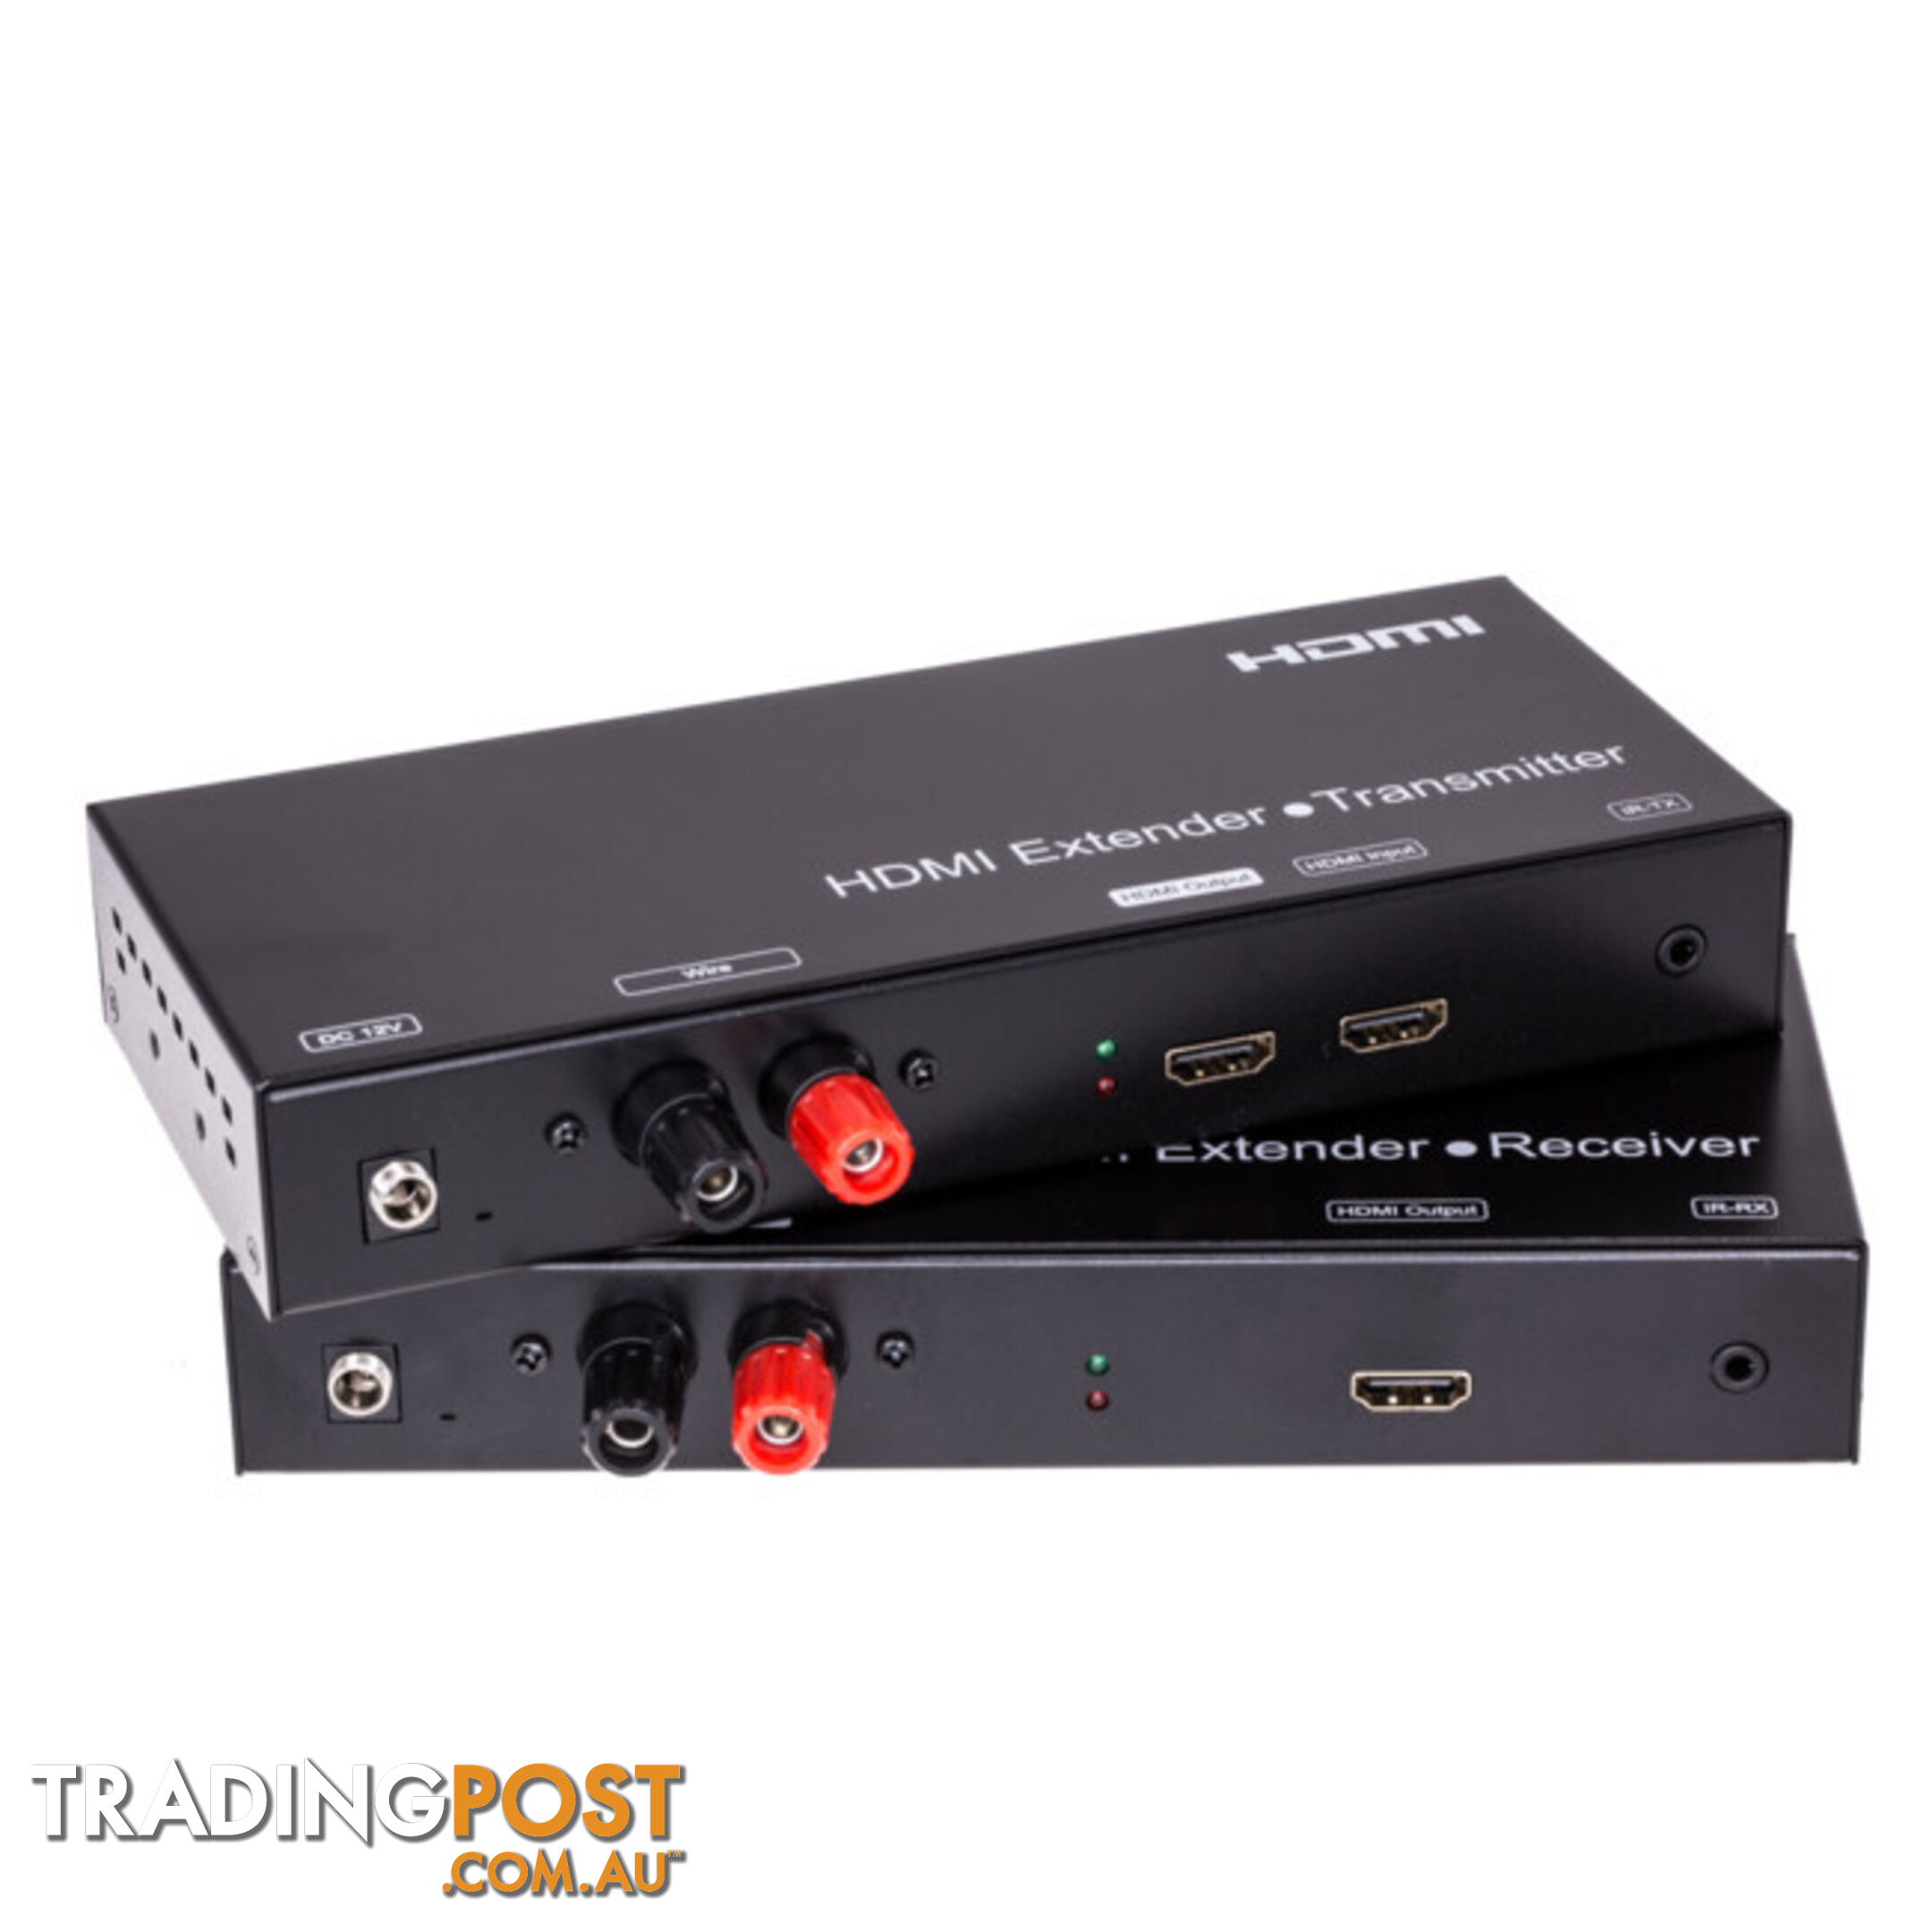 HDMIAW HDMI EXTENDER OVER ANY WIRE EXTENDING UP TO 3.8KM